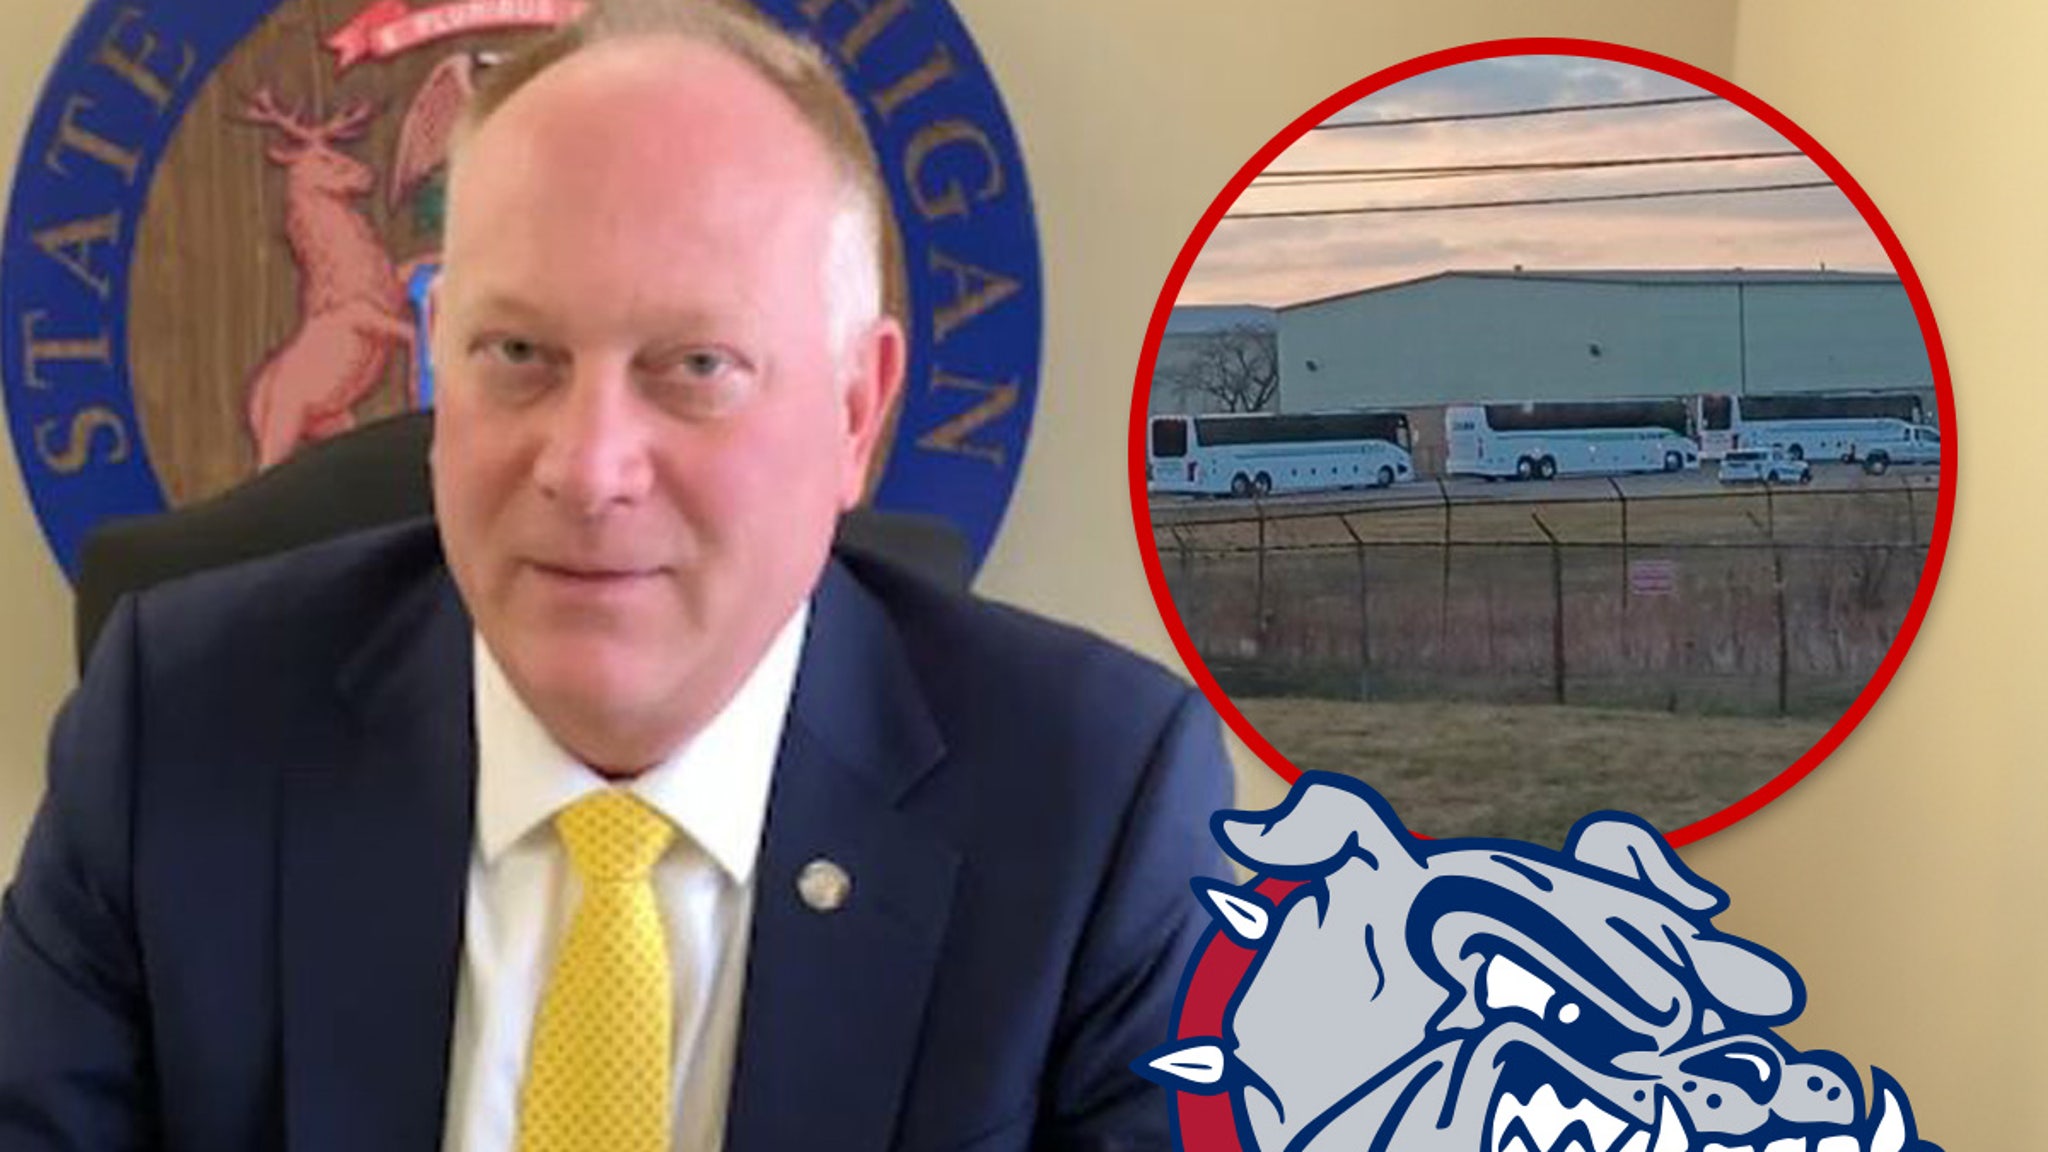 Michigan Politician Swears Gonzaga Hoops Team Buses Are Full Of 'Illegal Invaders'